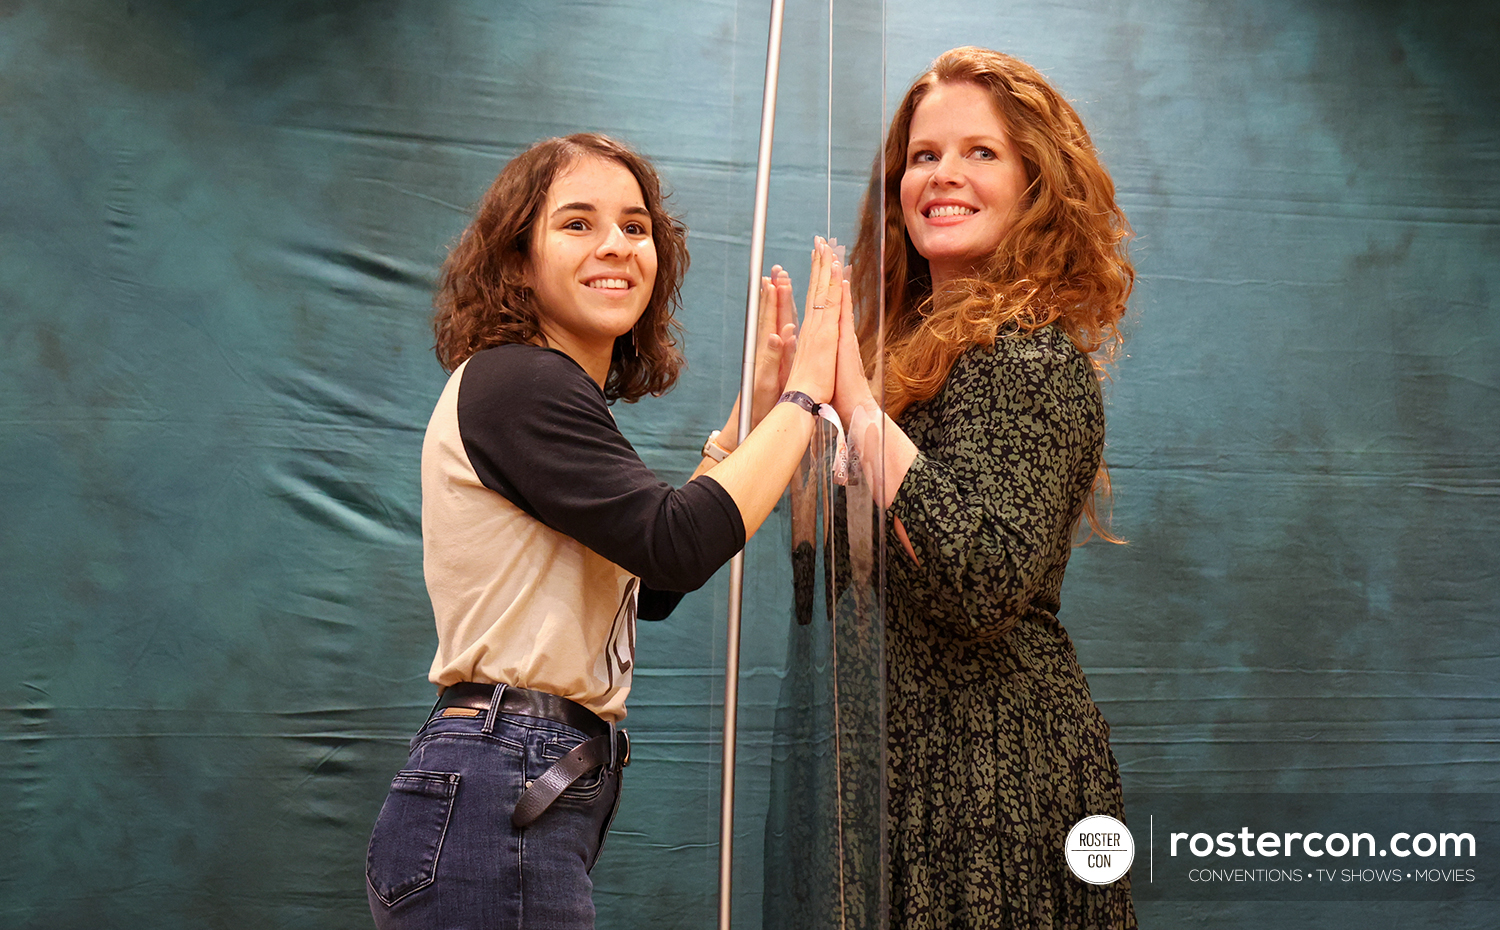 Photoshoot Rebecca Mader - Once Upon A Time - The Happy Ending Convention 4